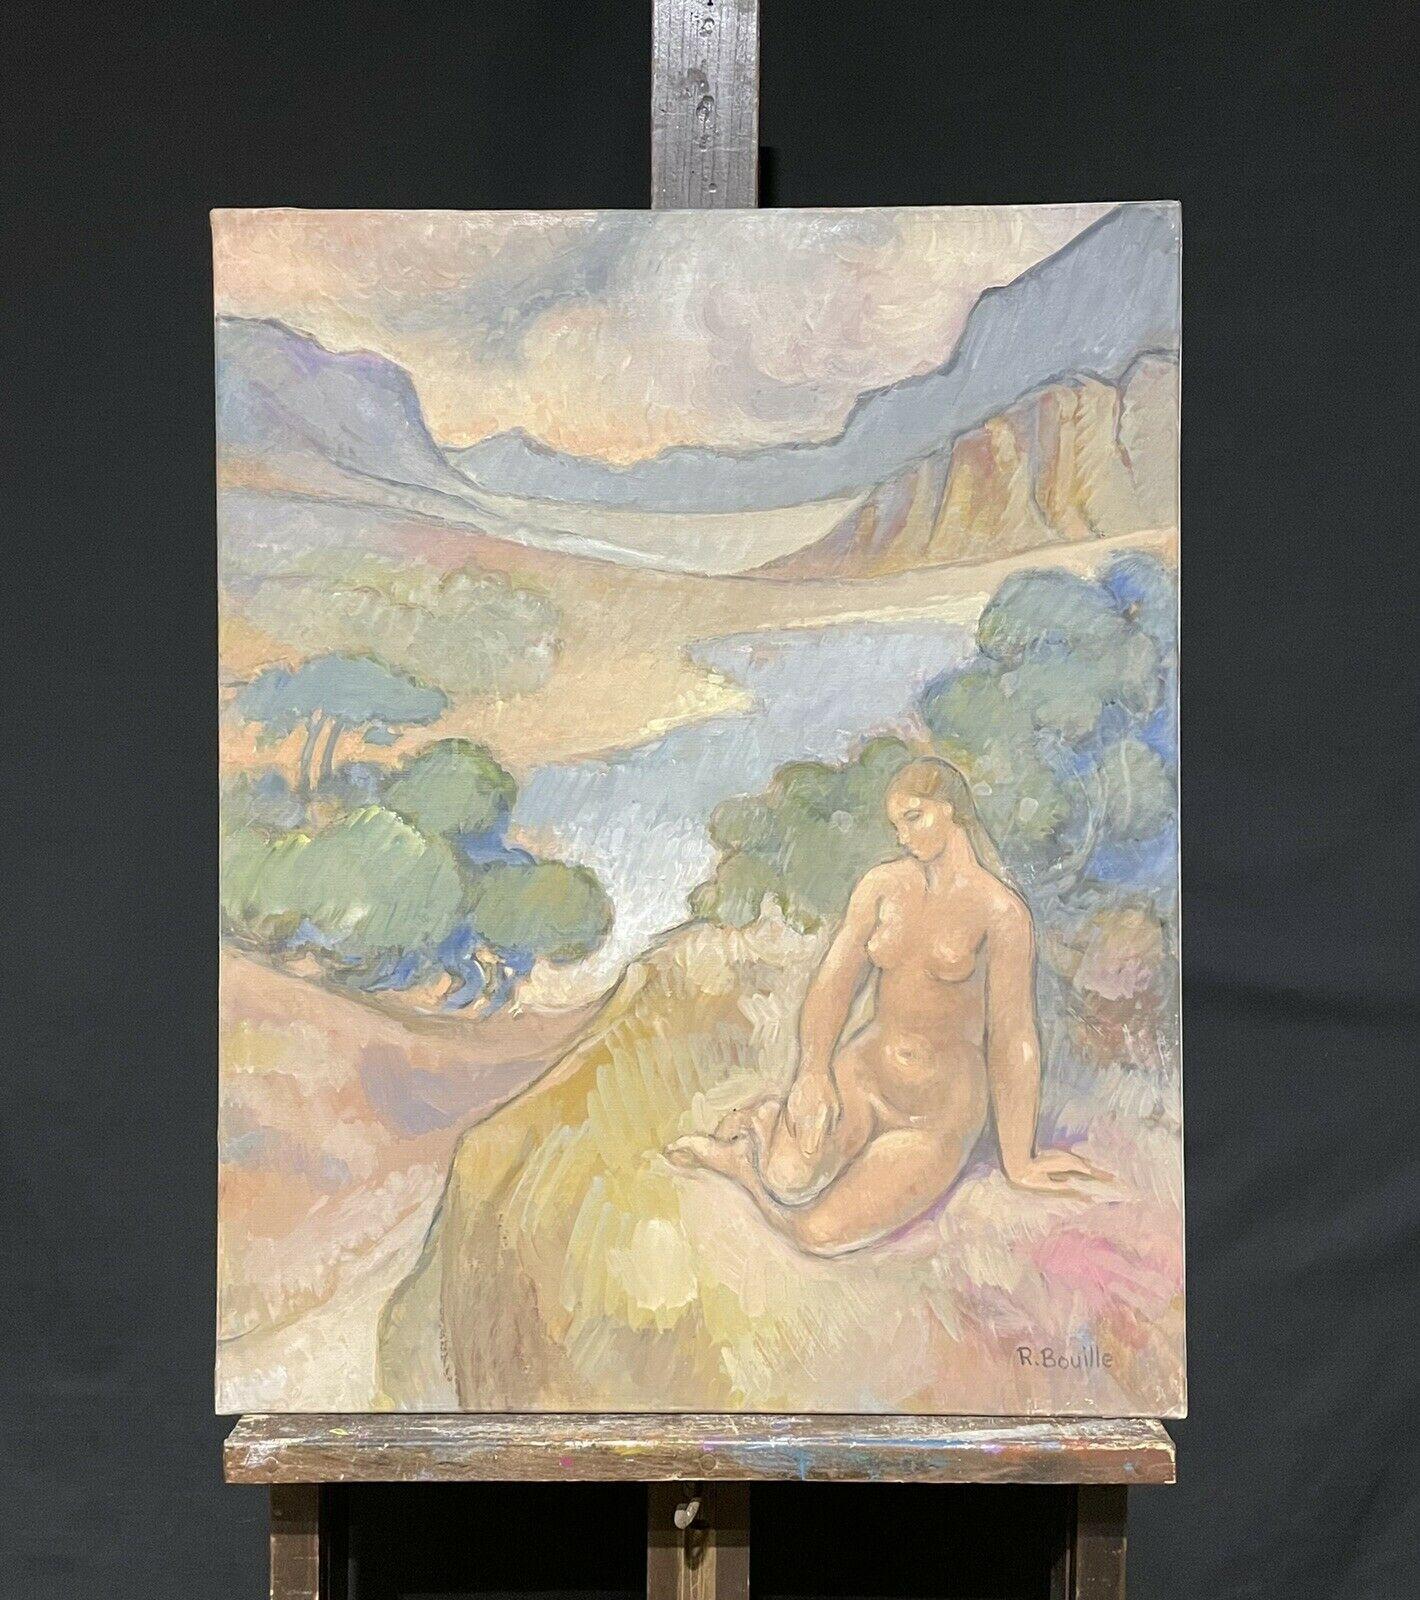 LARGE FRENCH SURREALIST/ IMPRESSIONIST OIL - NUDE BATHER PROVENCAL LAKE VIEW - Painting by Robert Bouille